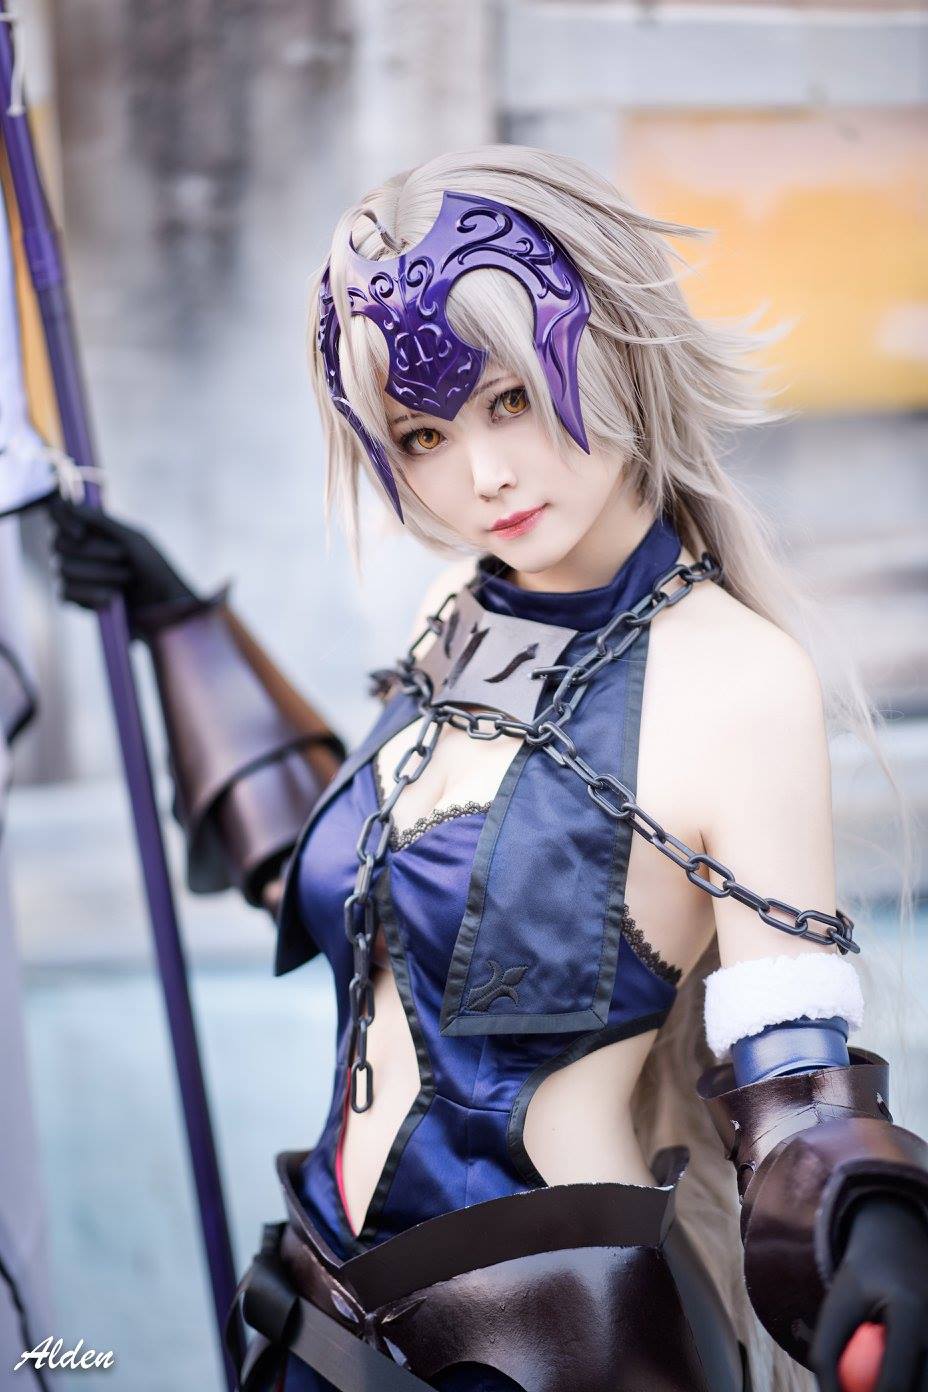 Arty as Jeanne d'Arc (Alter) from 'Fate/Grand Order' | Arty from Taiwan | MANGA.TOKYO World Cosplayers | Artyさん／『Fate/Grand Order』ジャンヌ・ダルク（オルタ）